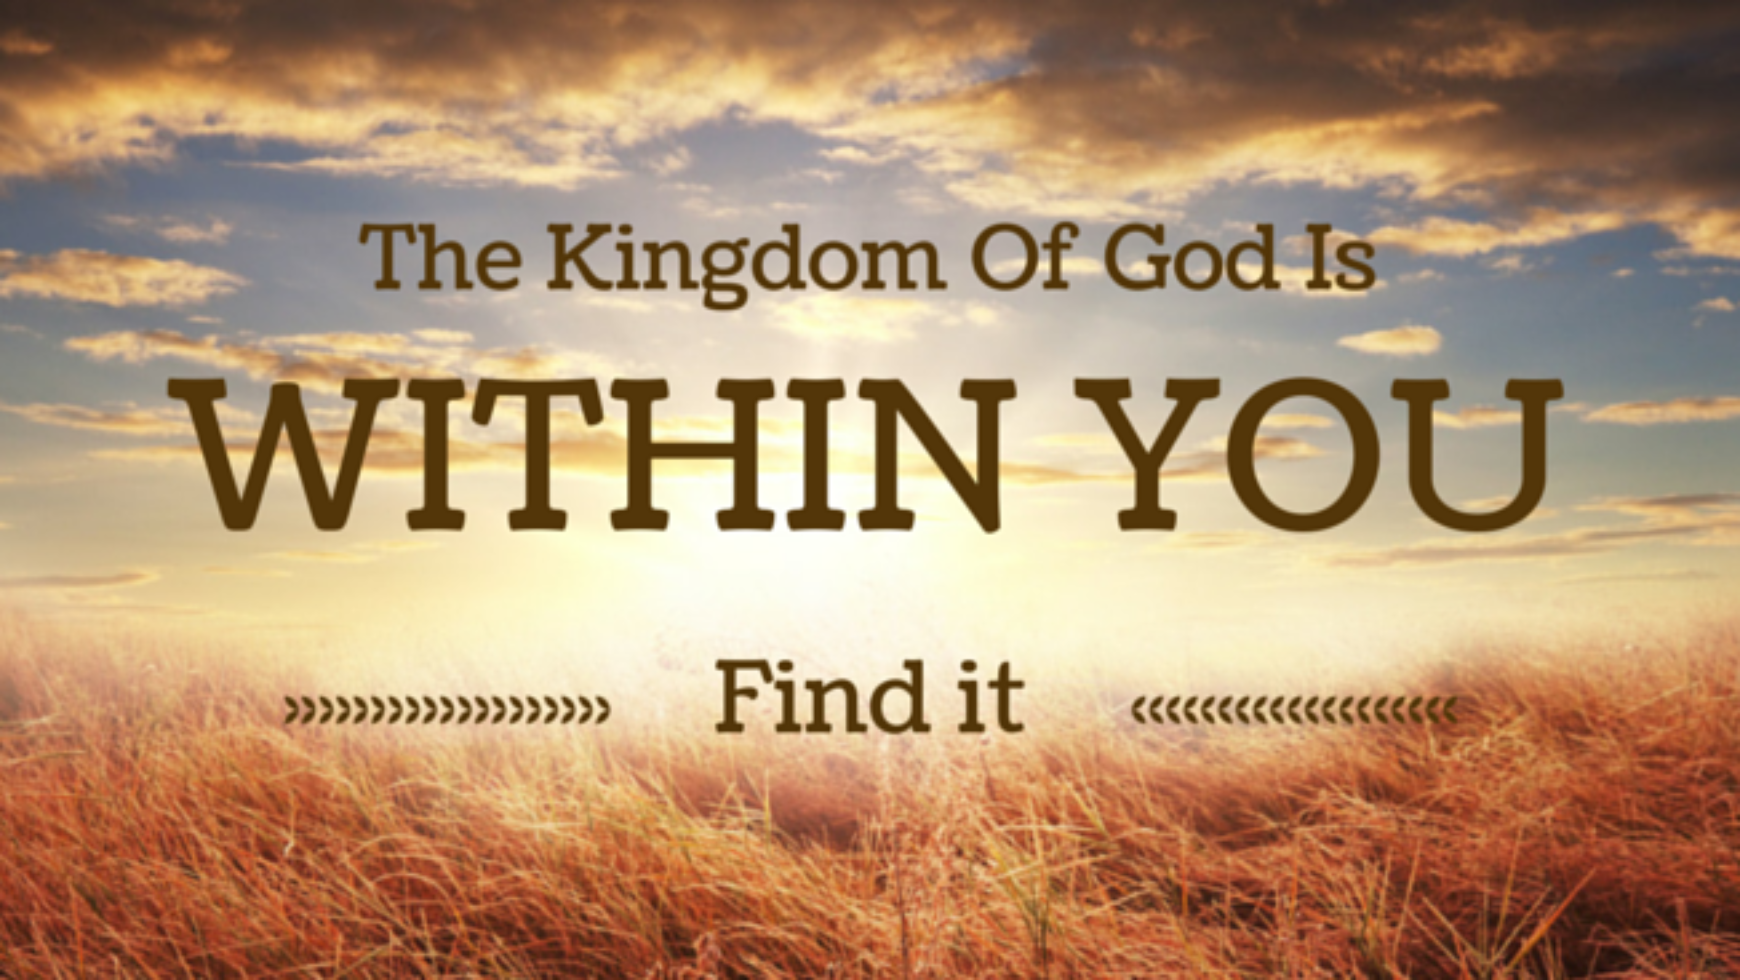 God’s Kingdom Is In Us